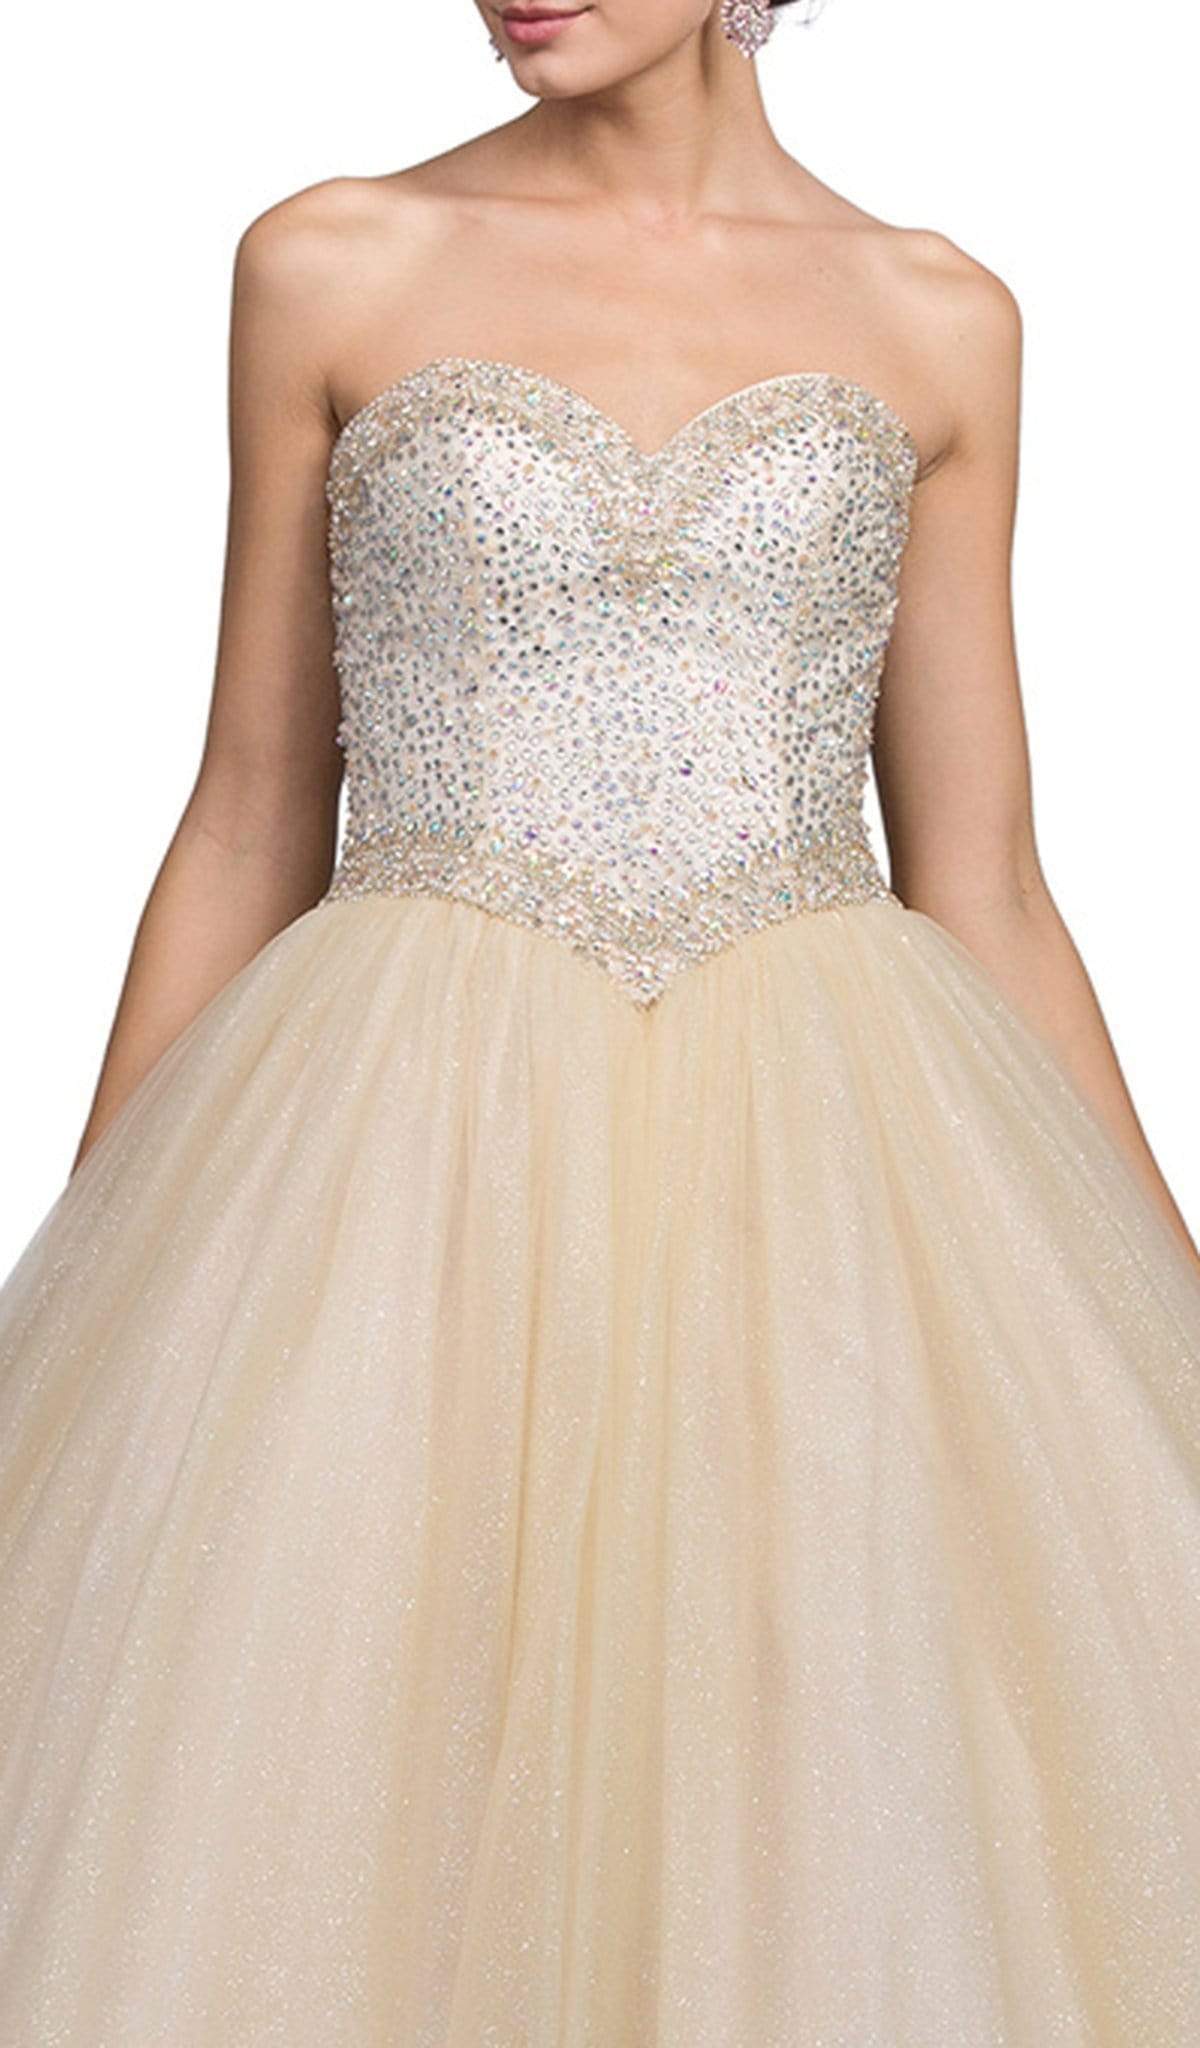 Dancing Queen - 1226 Strapless Bejeweled Sweetheart Quinceanera Ballgown Special Occasion Dress L / Champagne